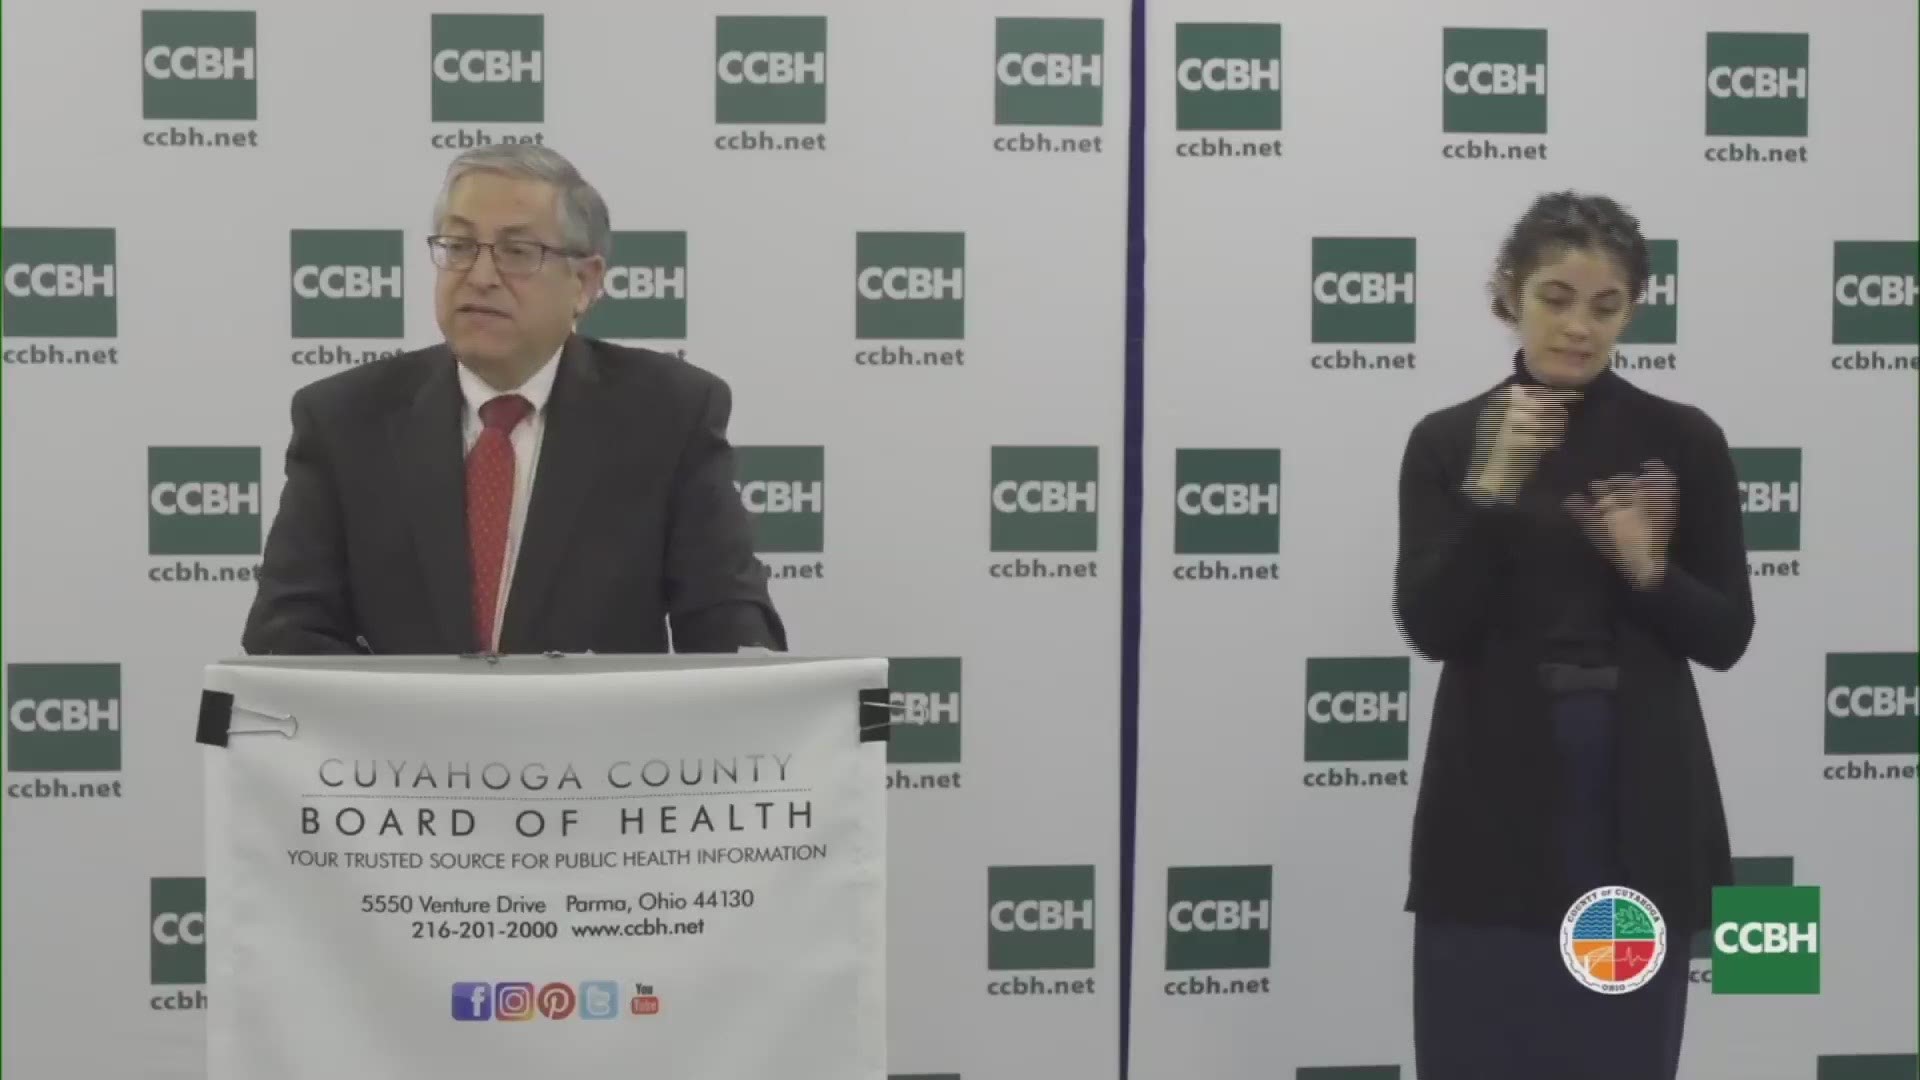 Cuyahoga County Executive Armond Budish announced plans to make budget cuts at the county level amid the coronavirus crisis.